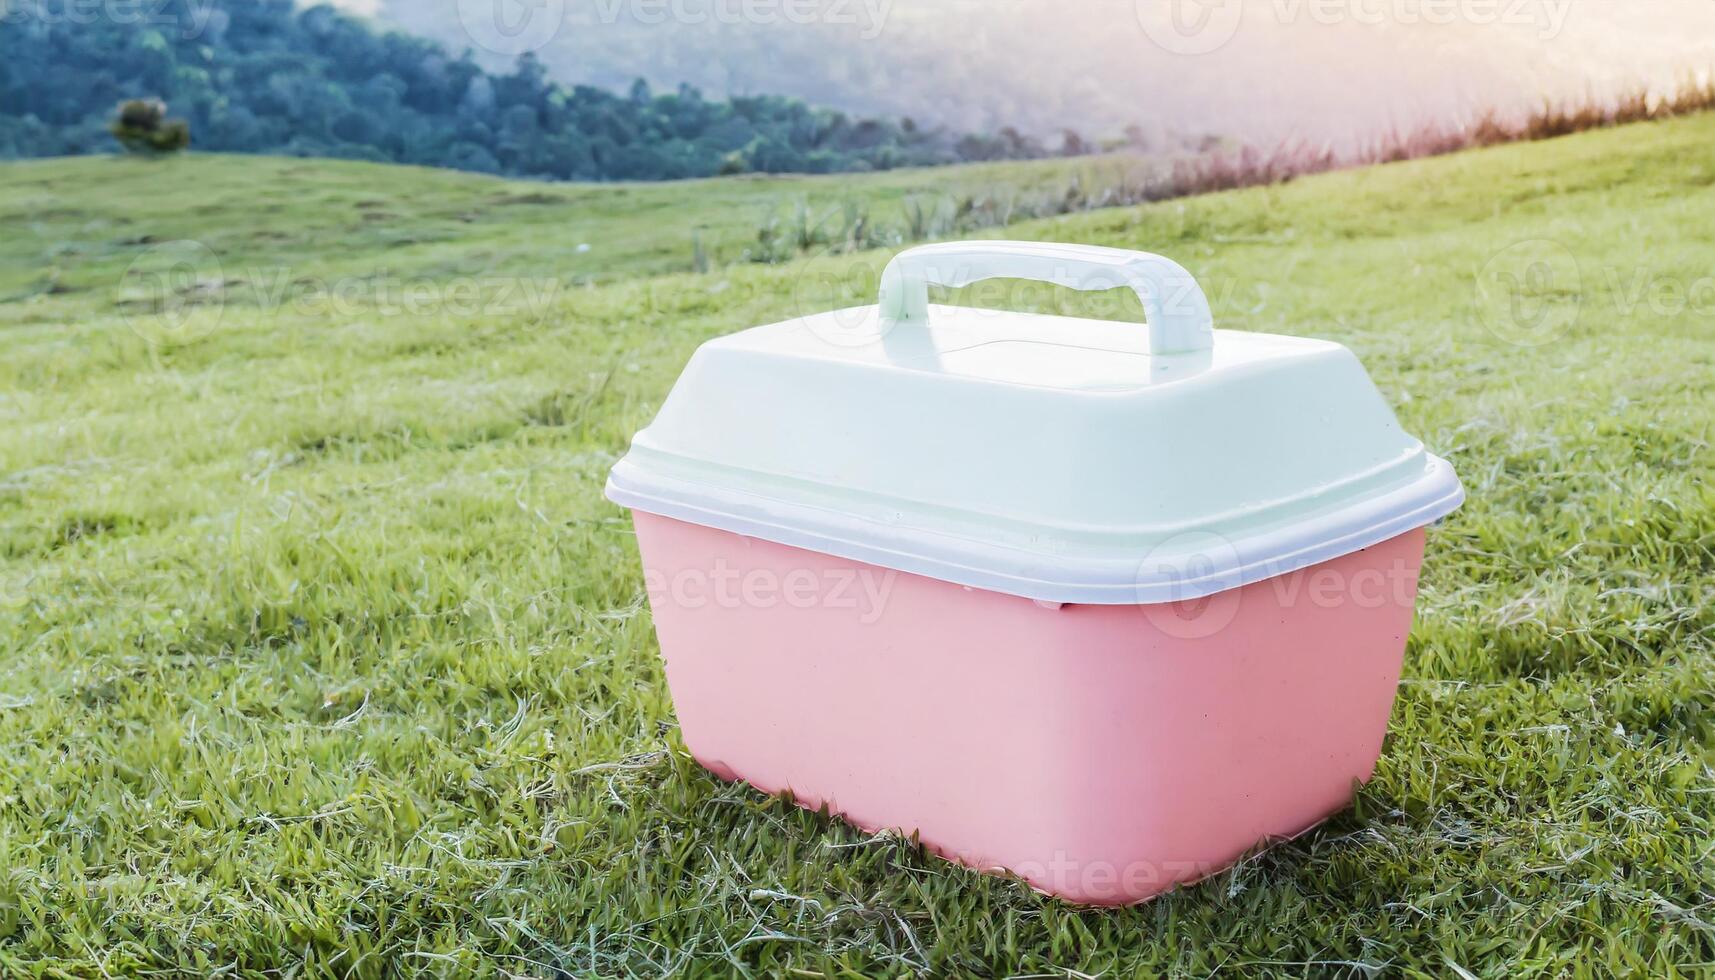 Ice box drink cooler mockup, on grass in urban parque photo